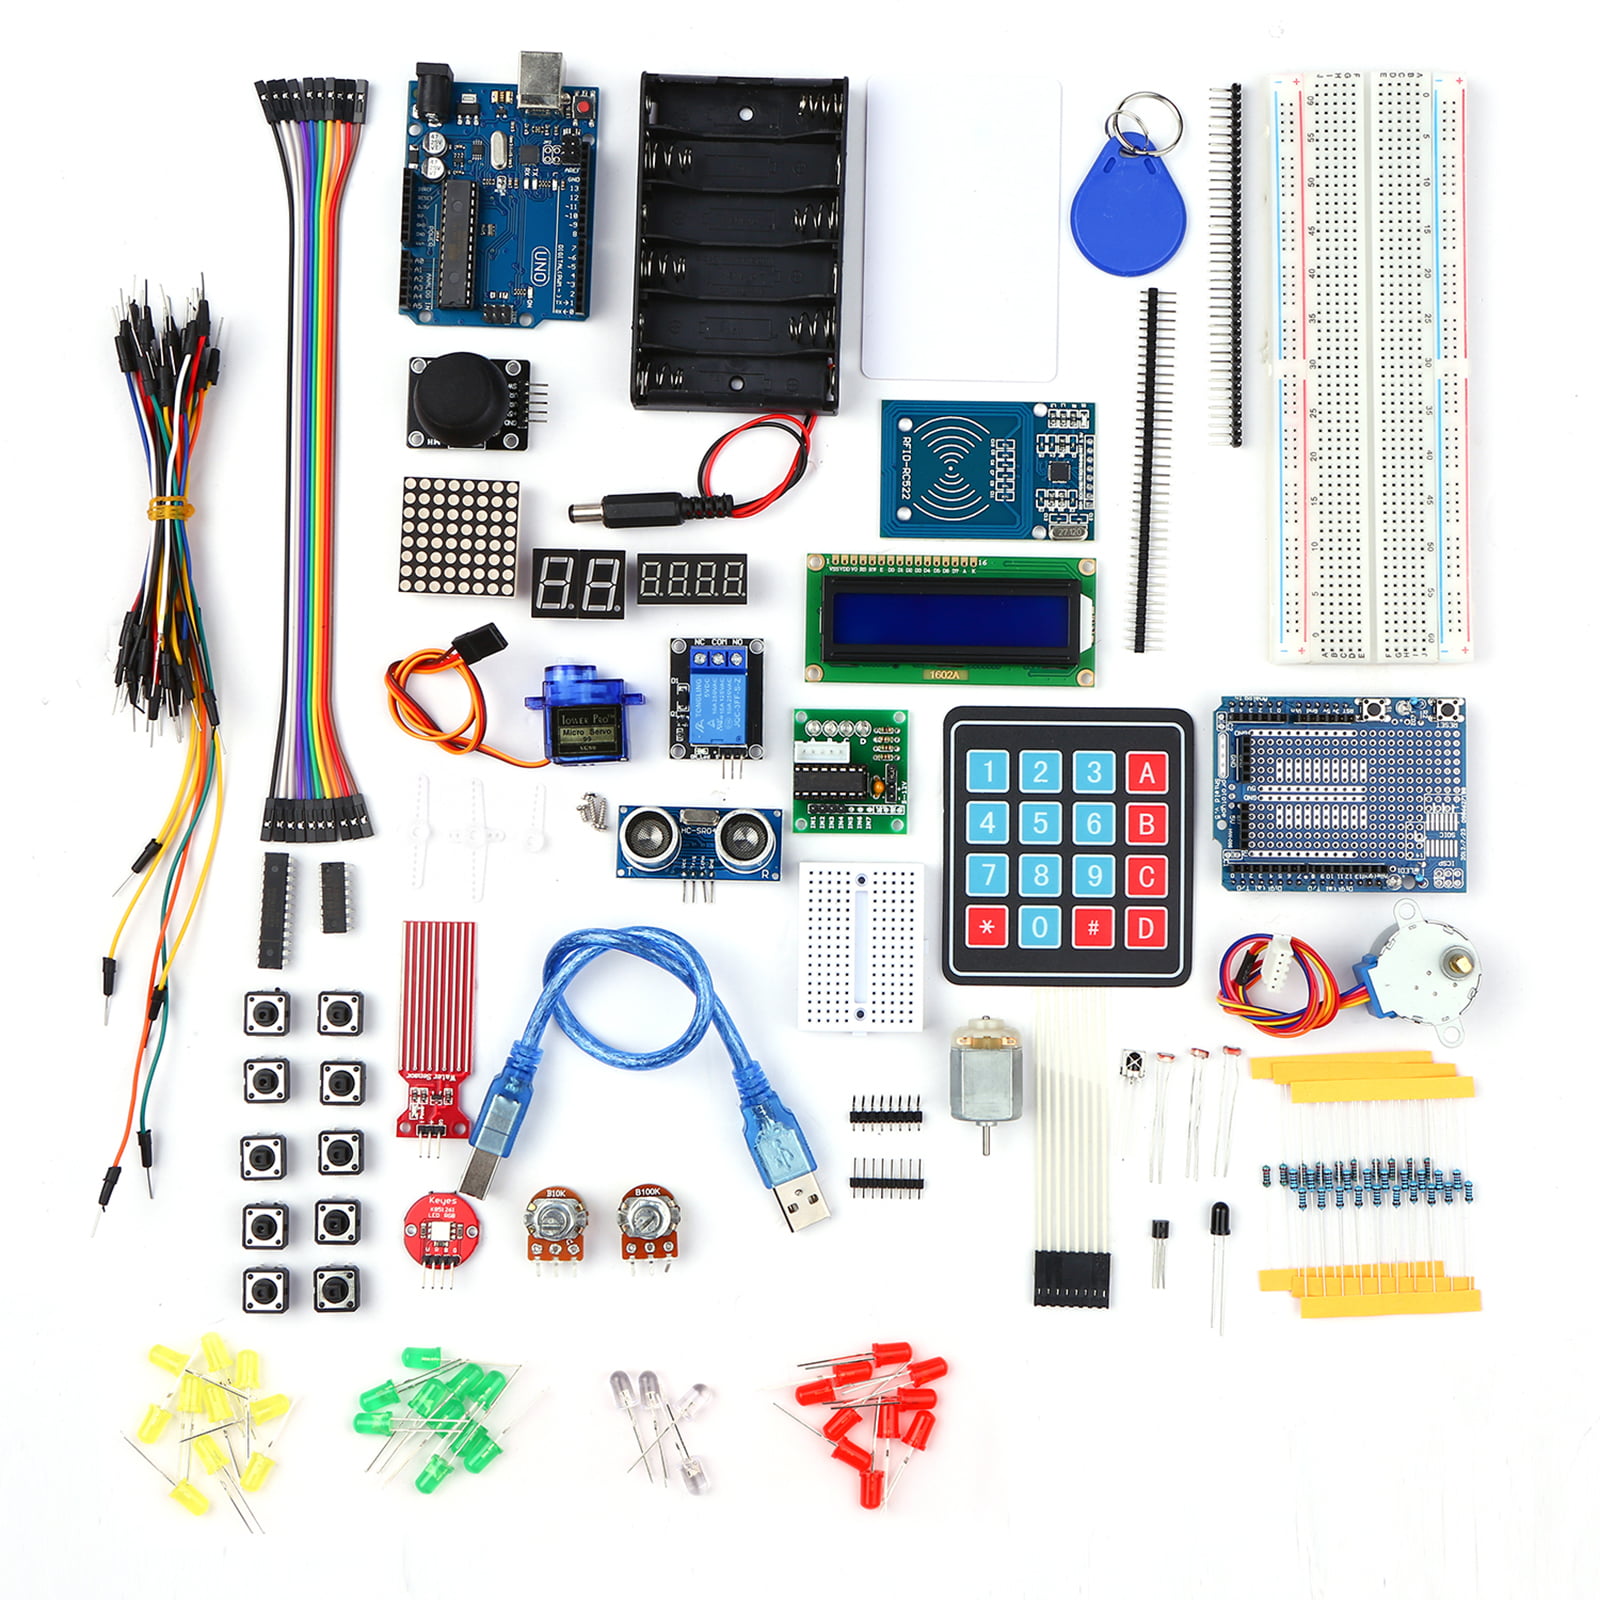 Jumper Wires Components & Flip Flop Schematic Electronics Kit with Breadboard 